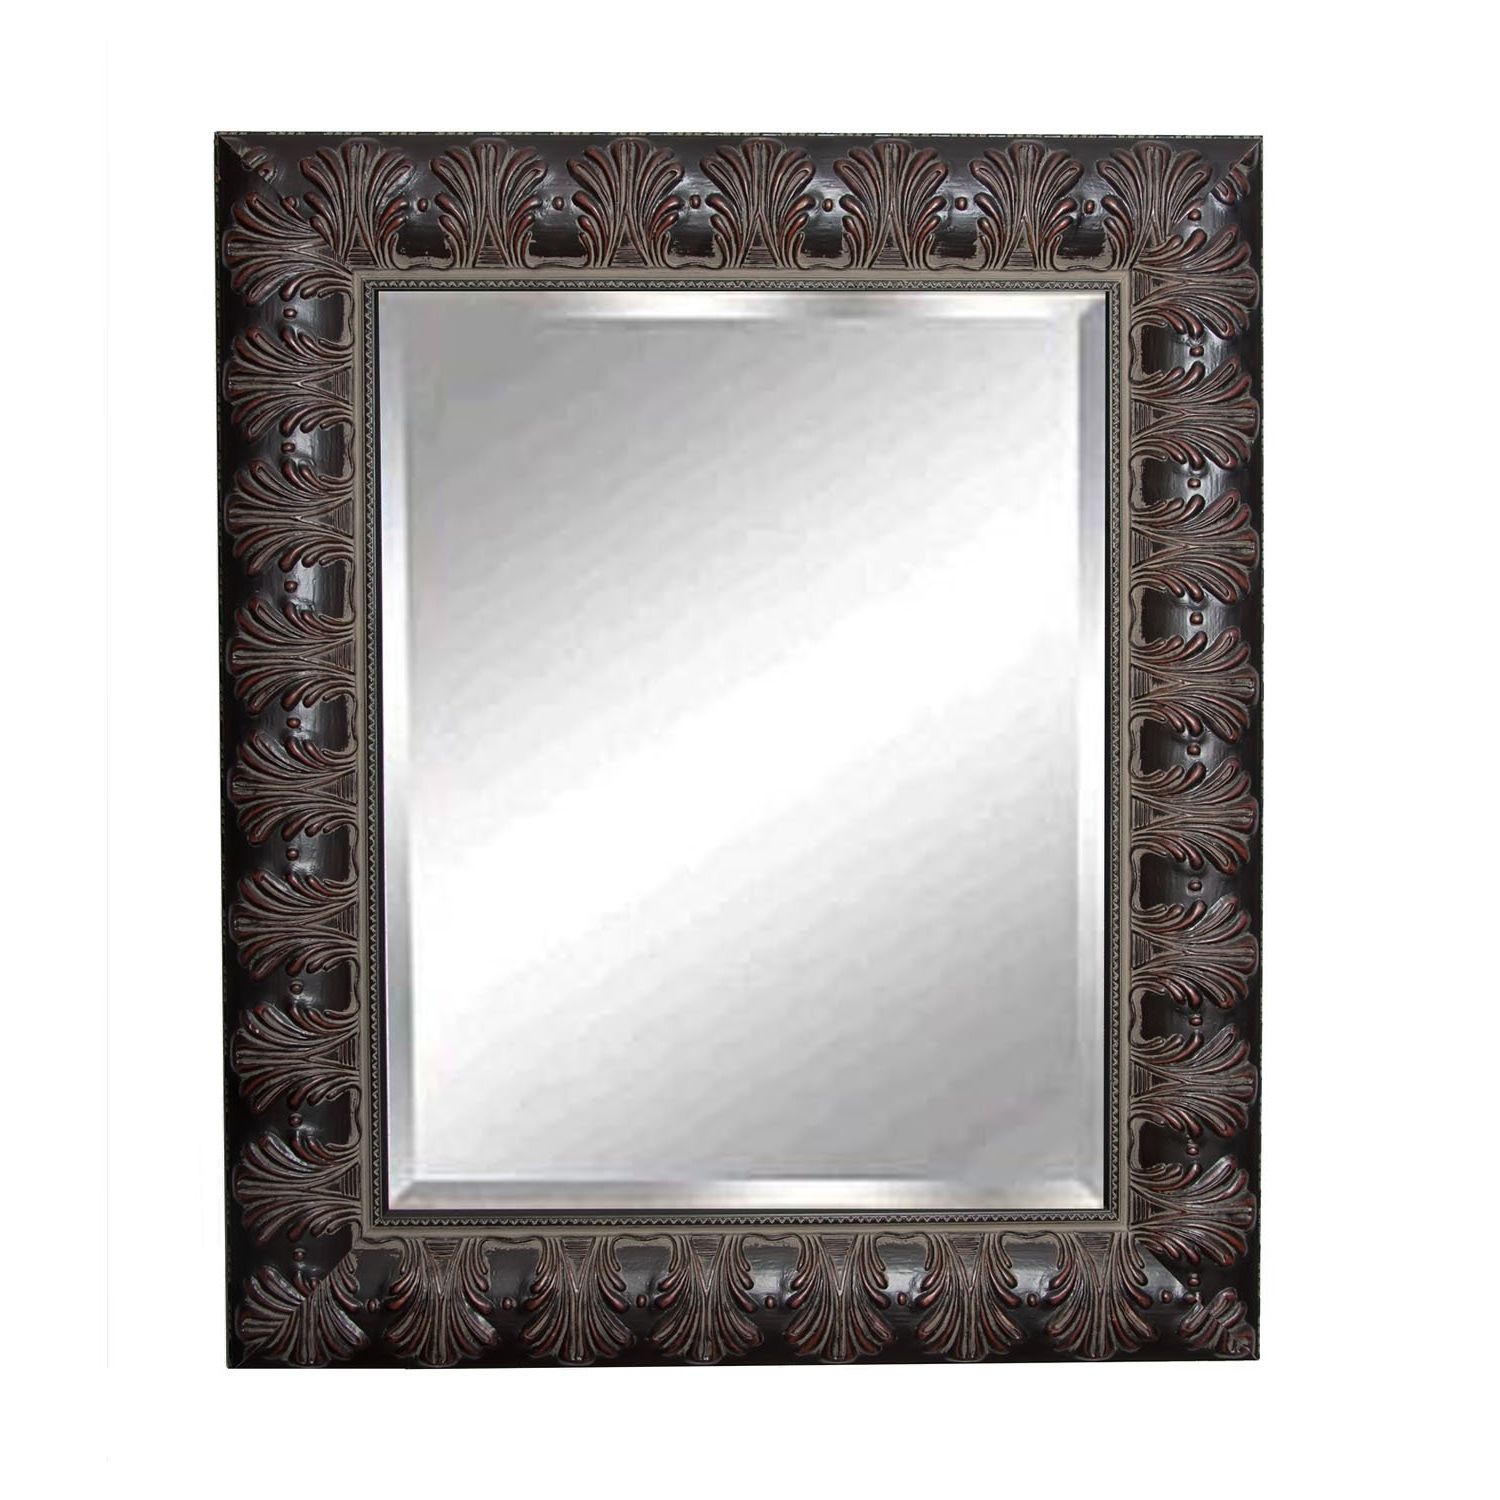 American Made Accent Wall Mirrors Inside Preferred Amazon: American Made Rayne Mahogany Feathered Accent Beveled (View 4 of 20)